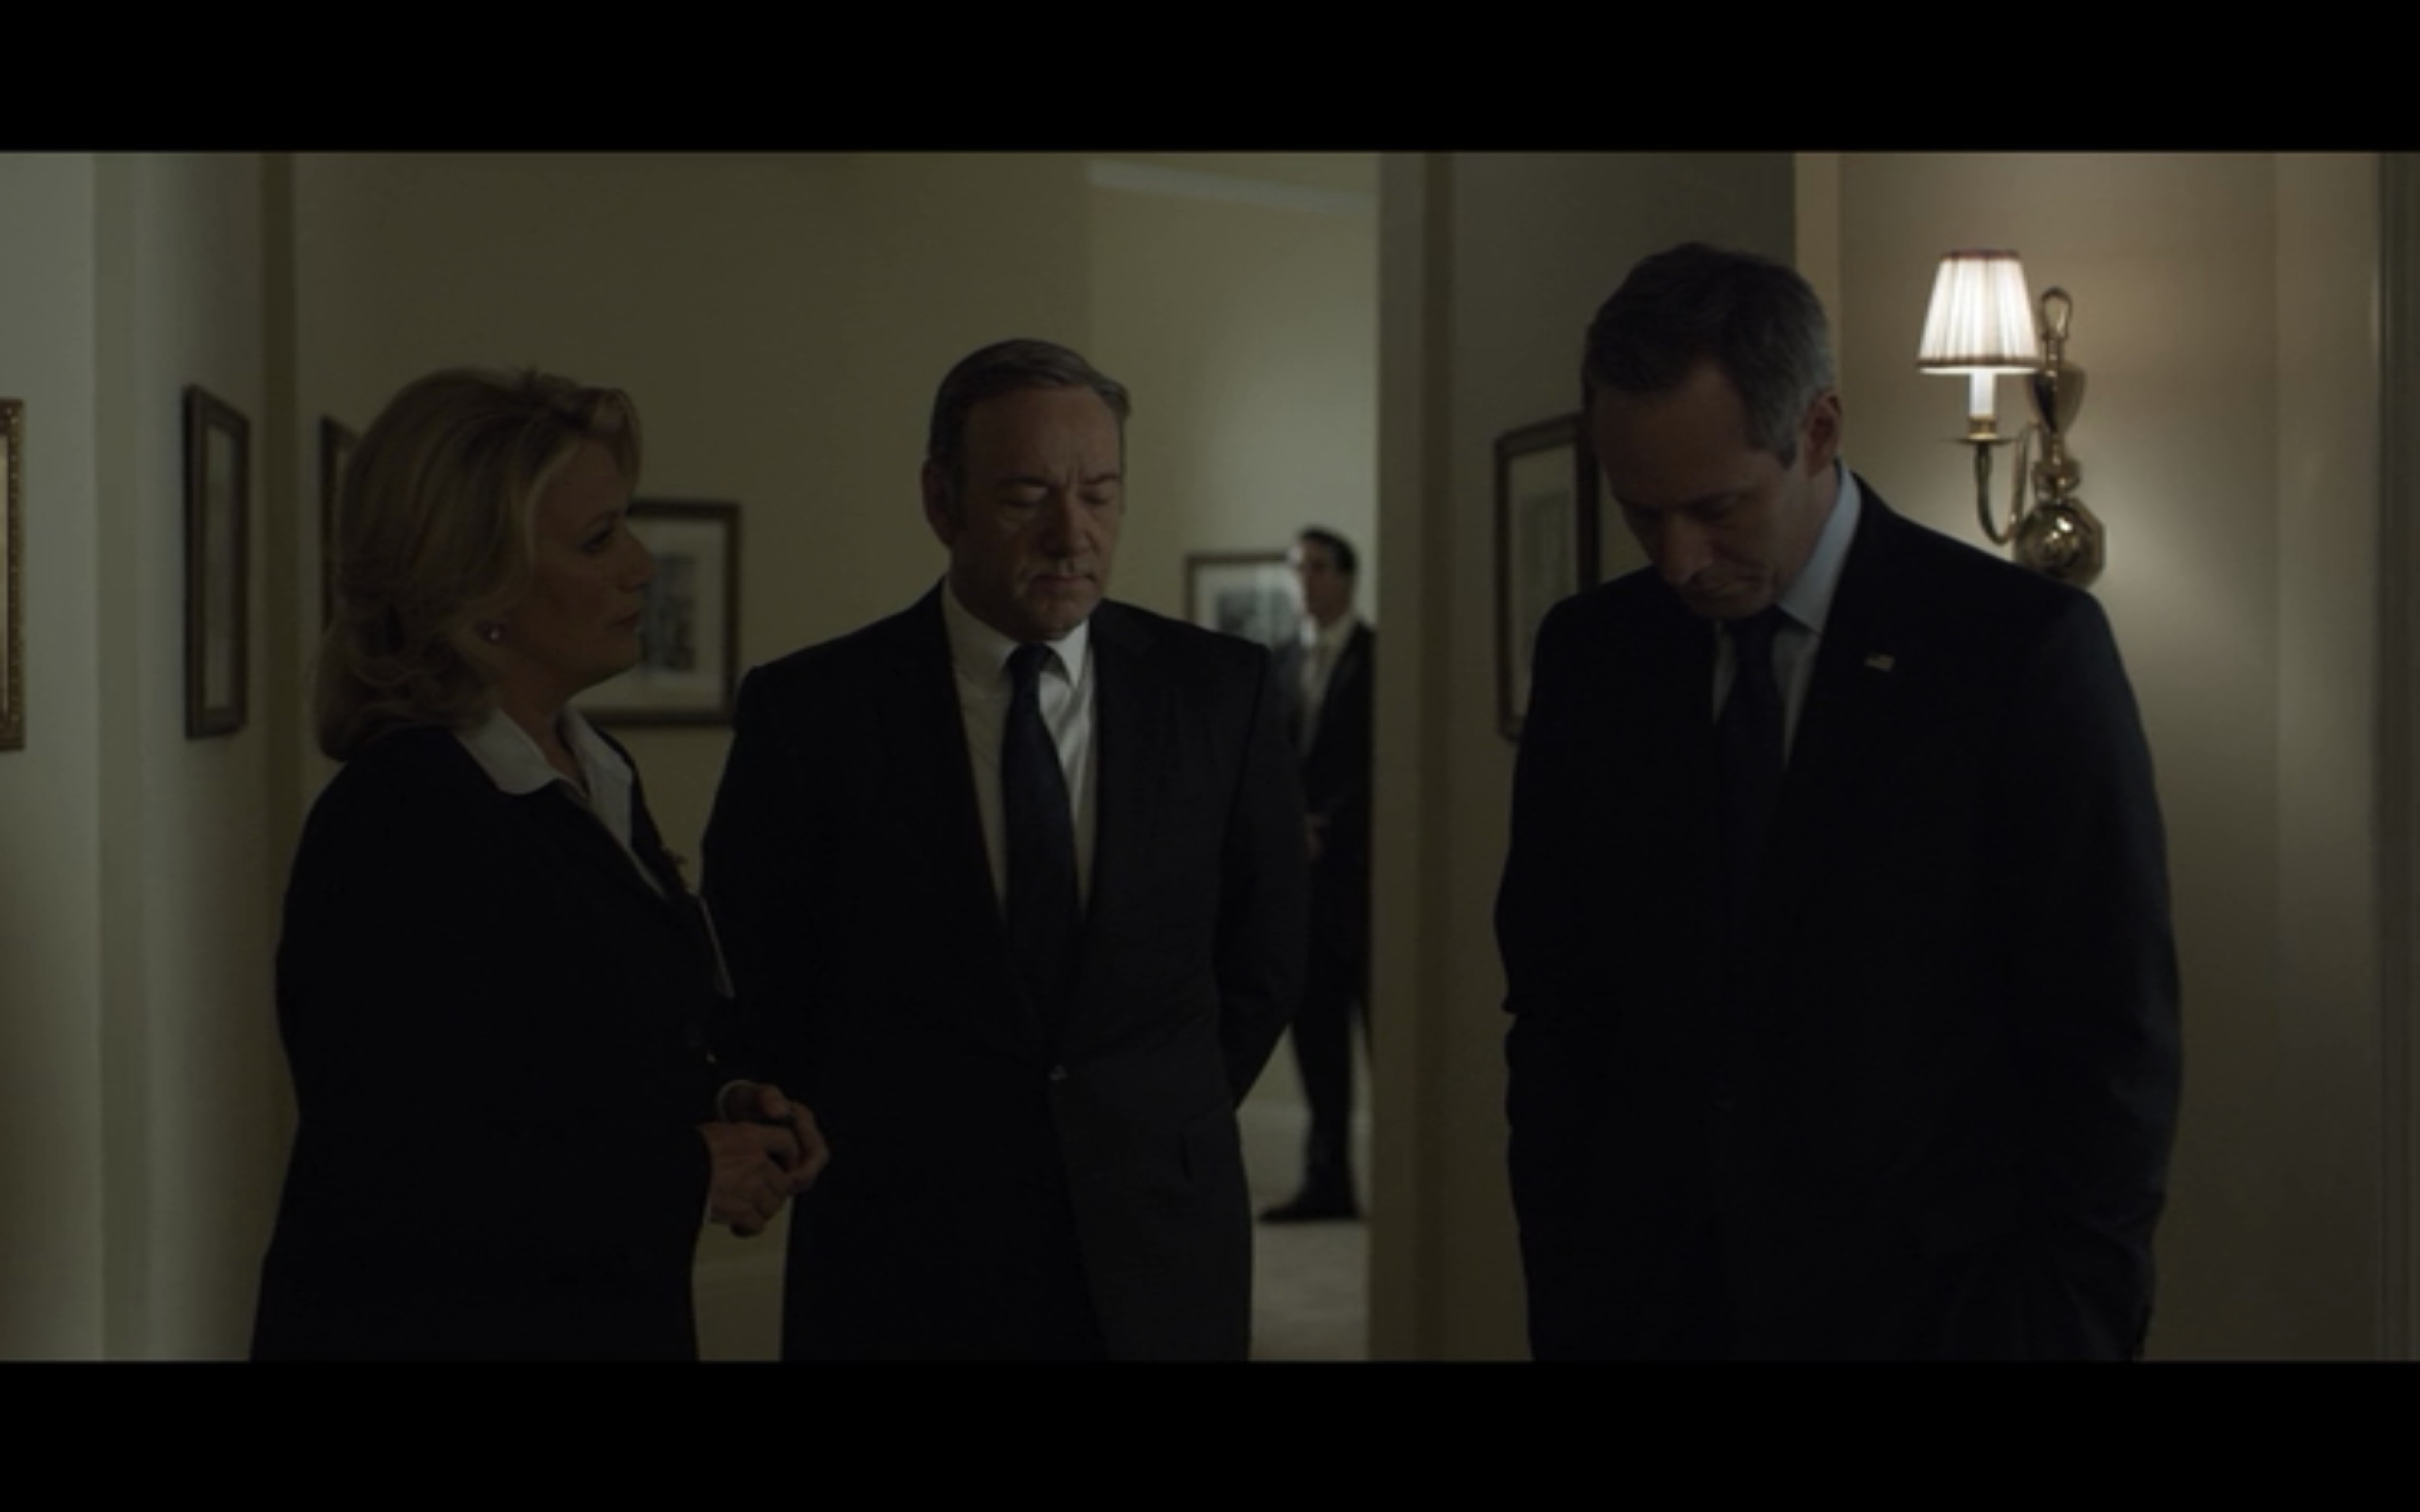 Jayne Atkinson, Kevin Spacey and Michel Gill, House of Cards